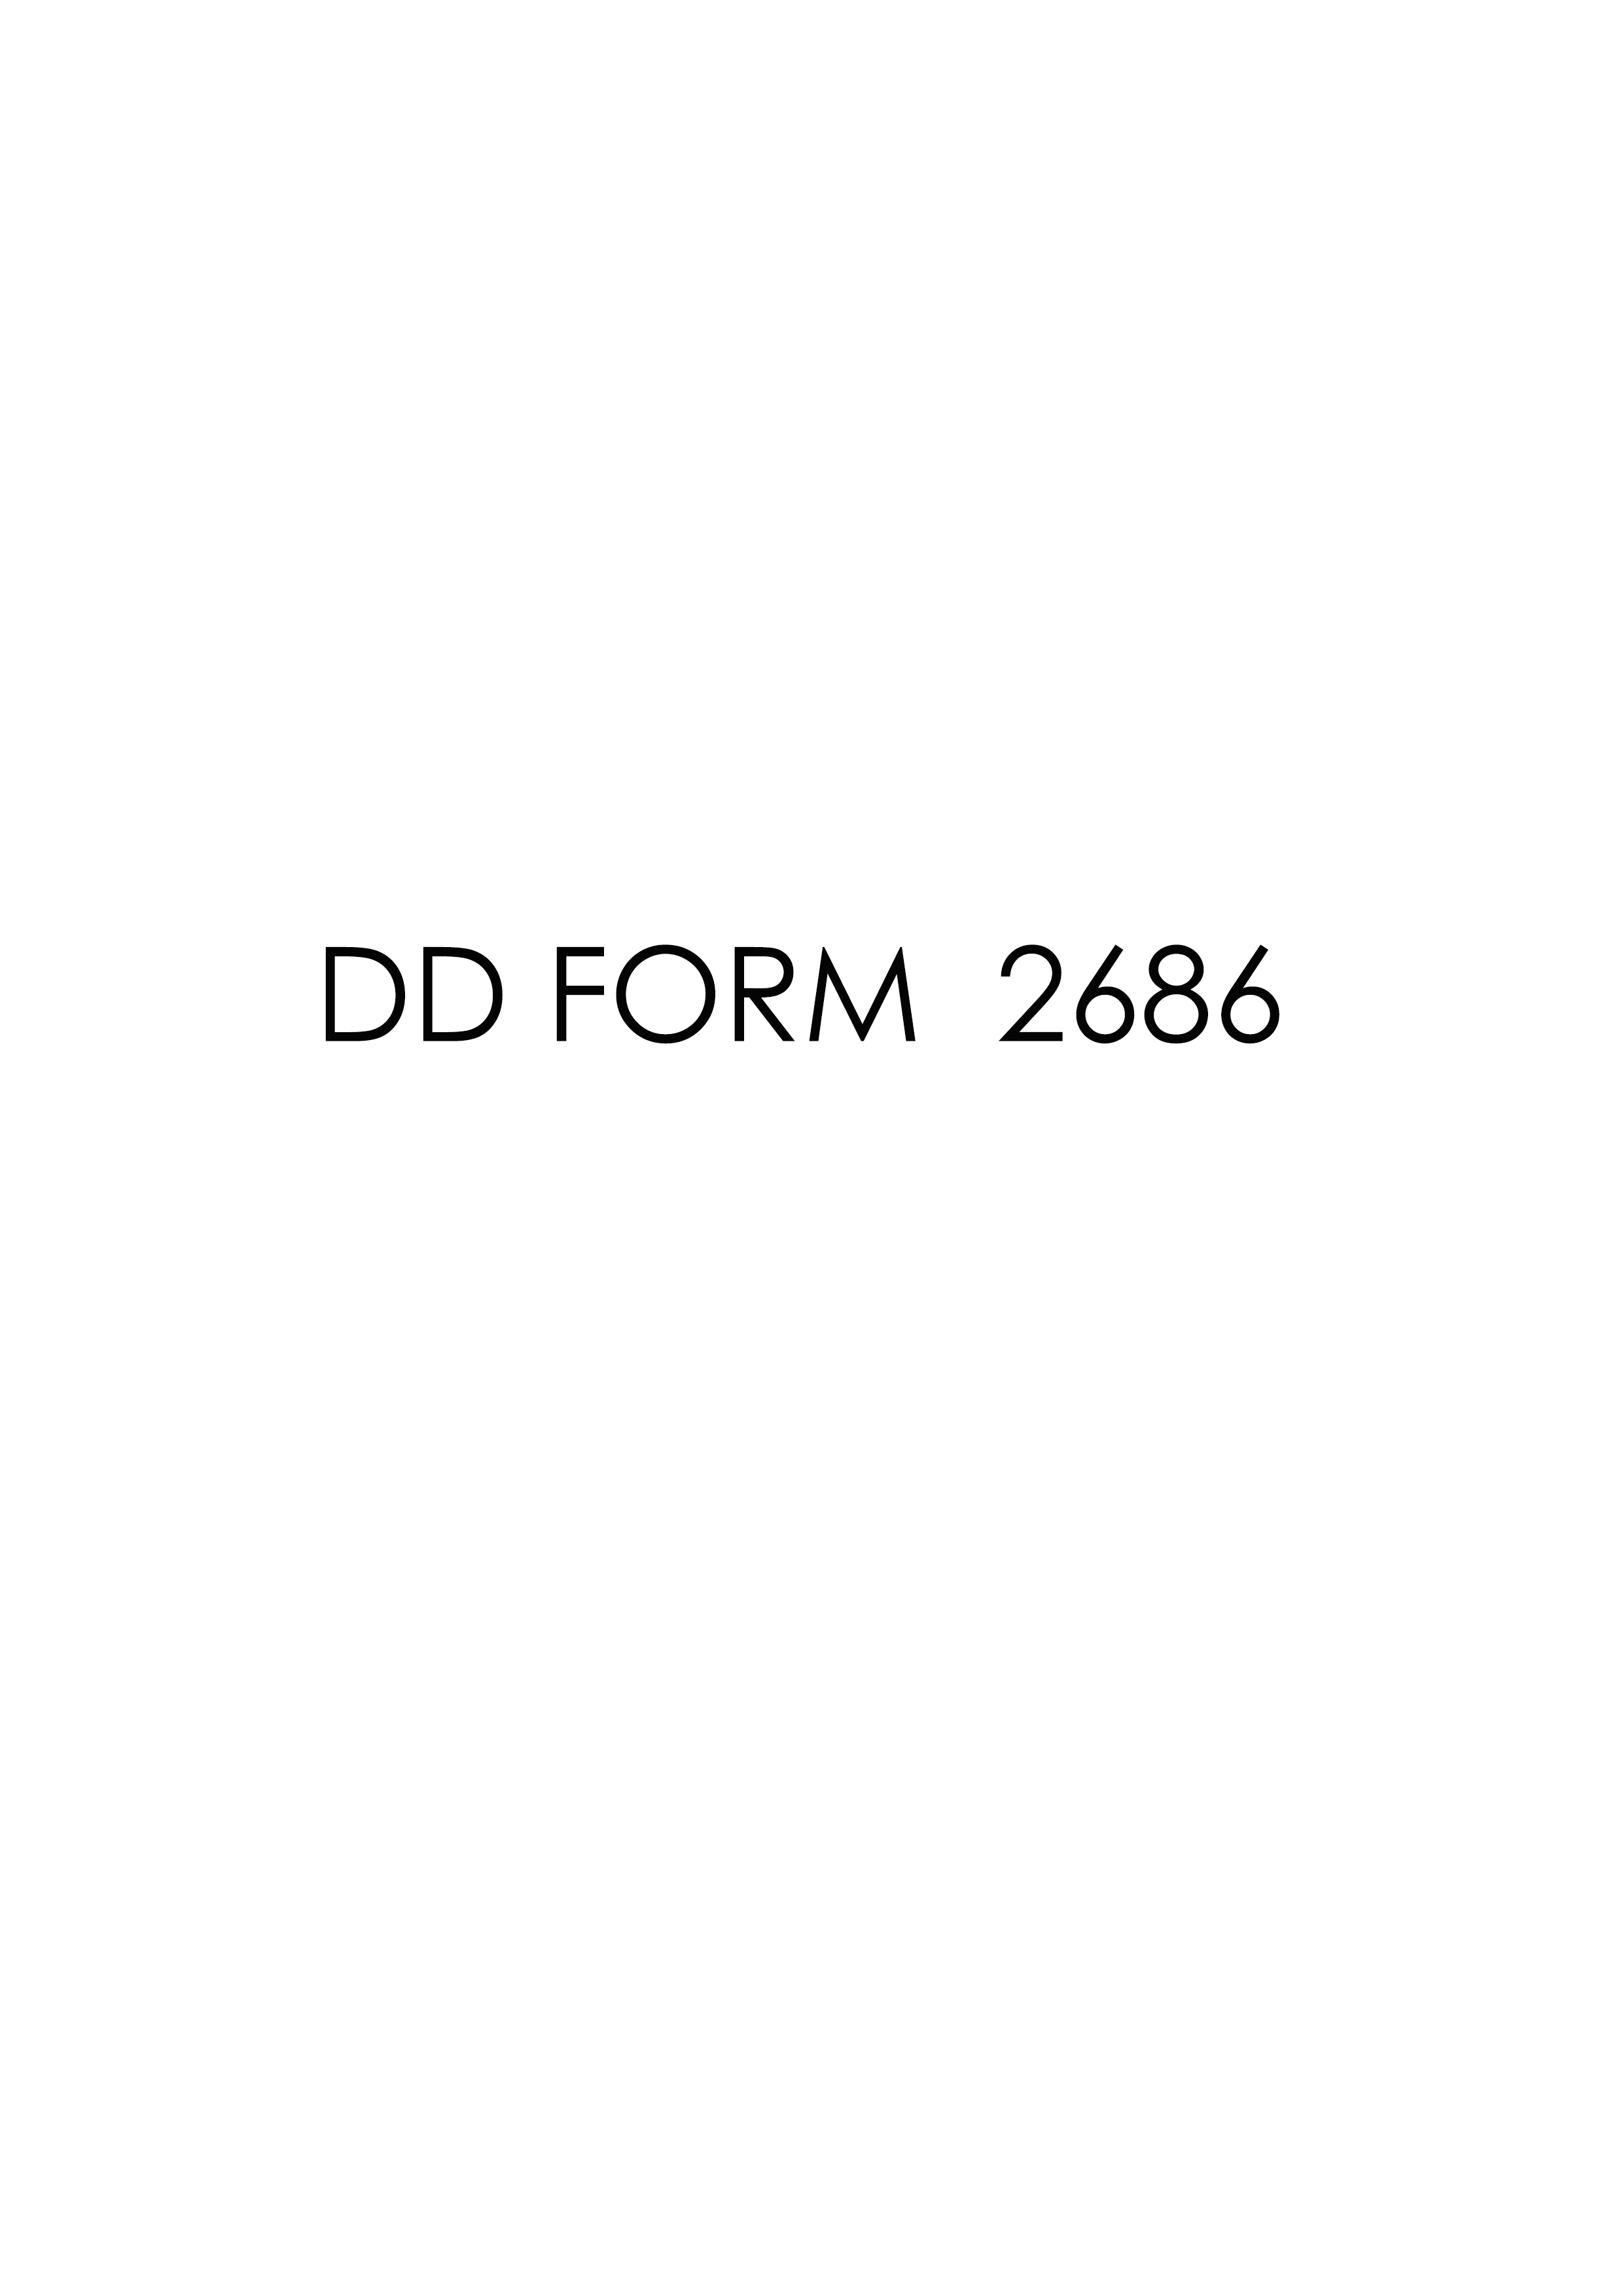 Download Fillable dd Form 2686